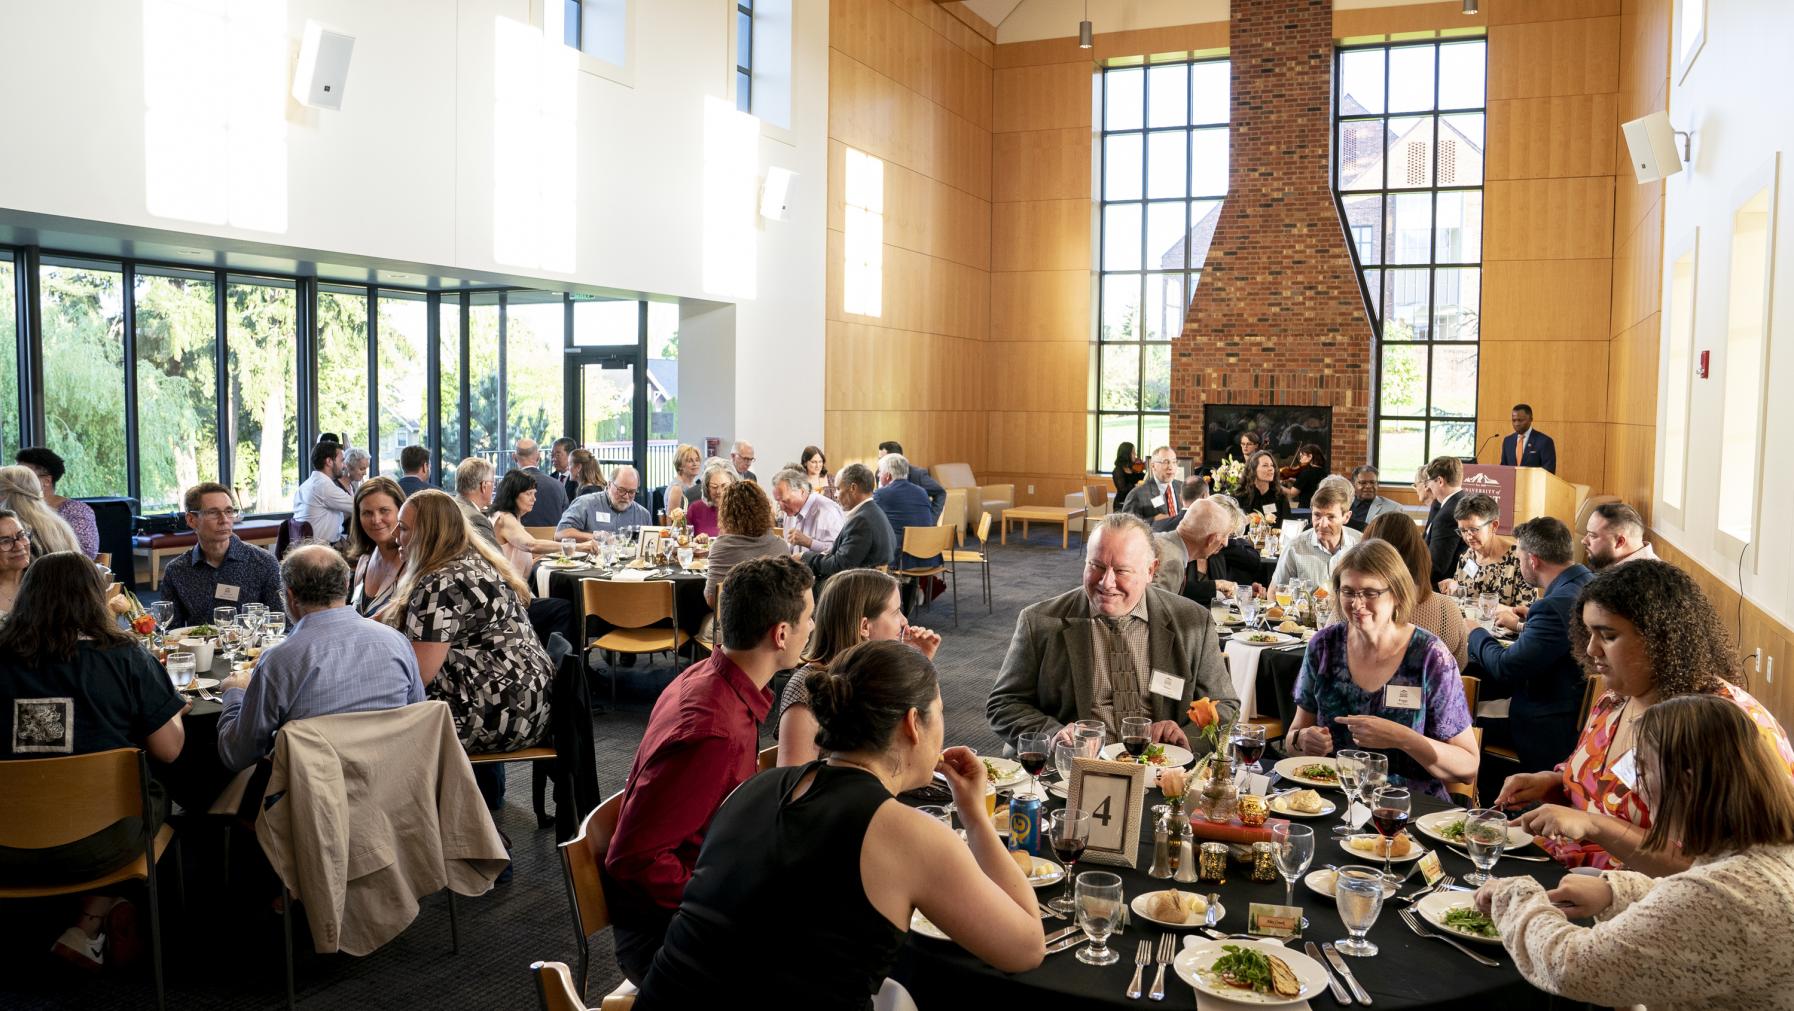 Trustees and campus members enjoy a luncheon during Commencement weekend.